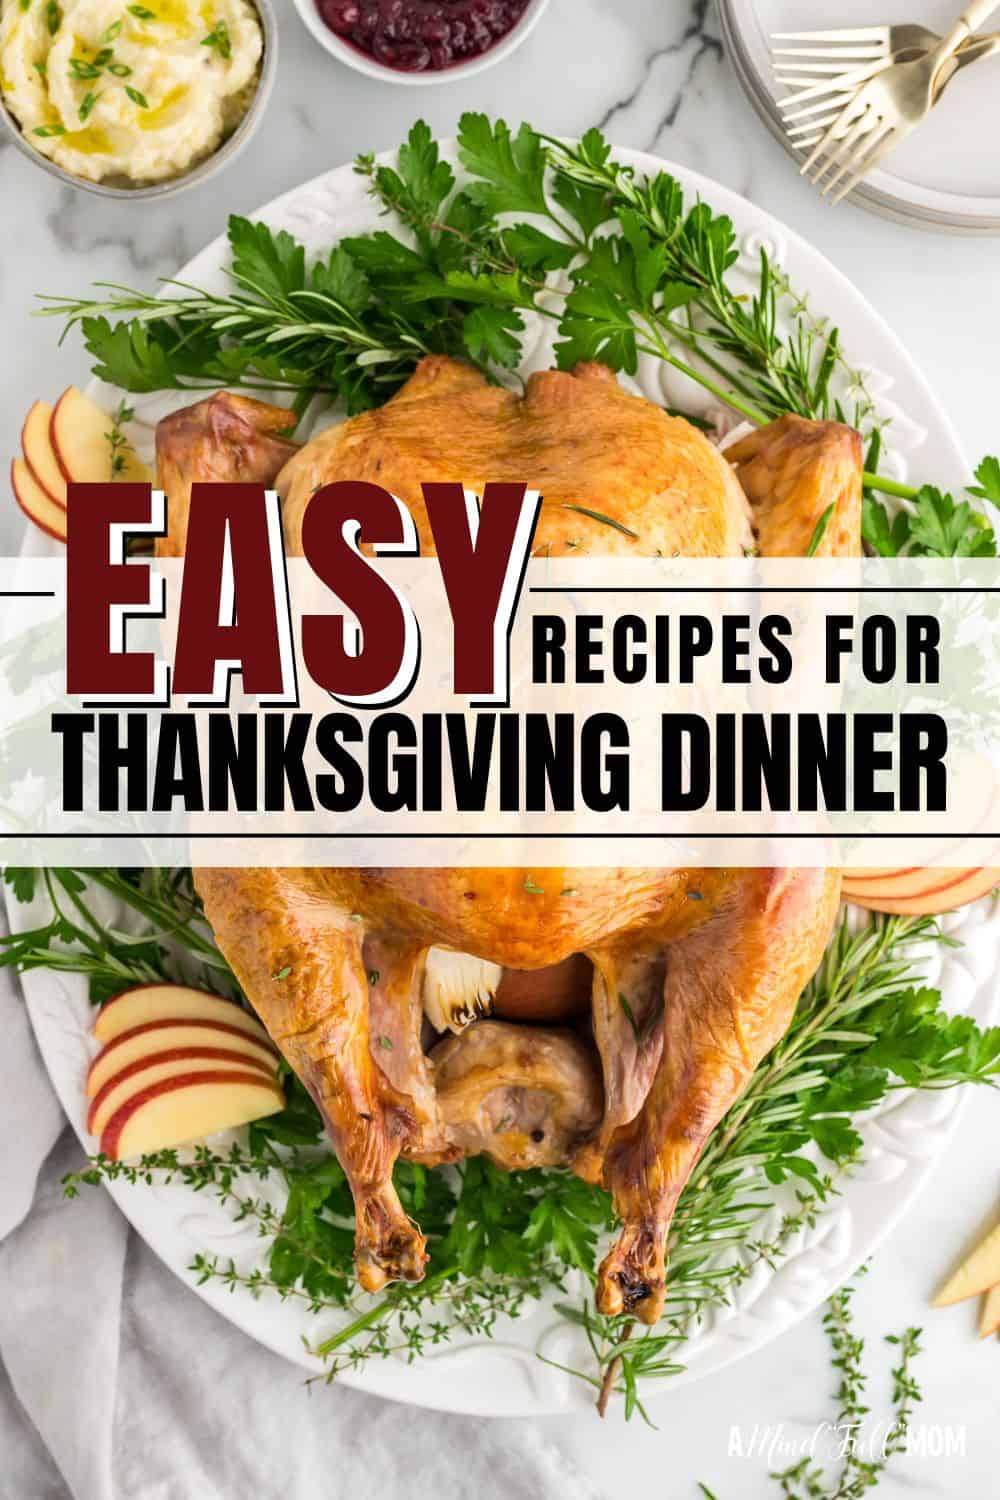 You don't need to be a chef to make a 5-star Thanksgiving Dinner! These Easy Thanksgiving Recipes are impressive, yet easy to make! From perfectly cooked turkey to the easiest mashed potatoes to simple desserts, this collection of Thanksgiving Recipes has it all. 